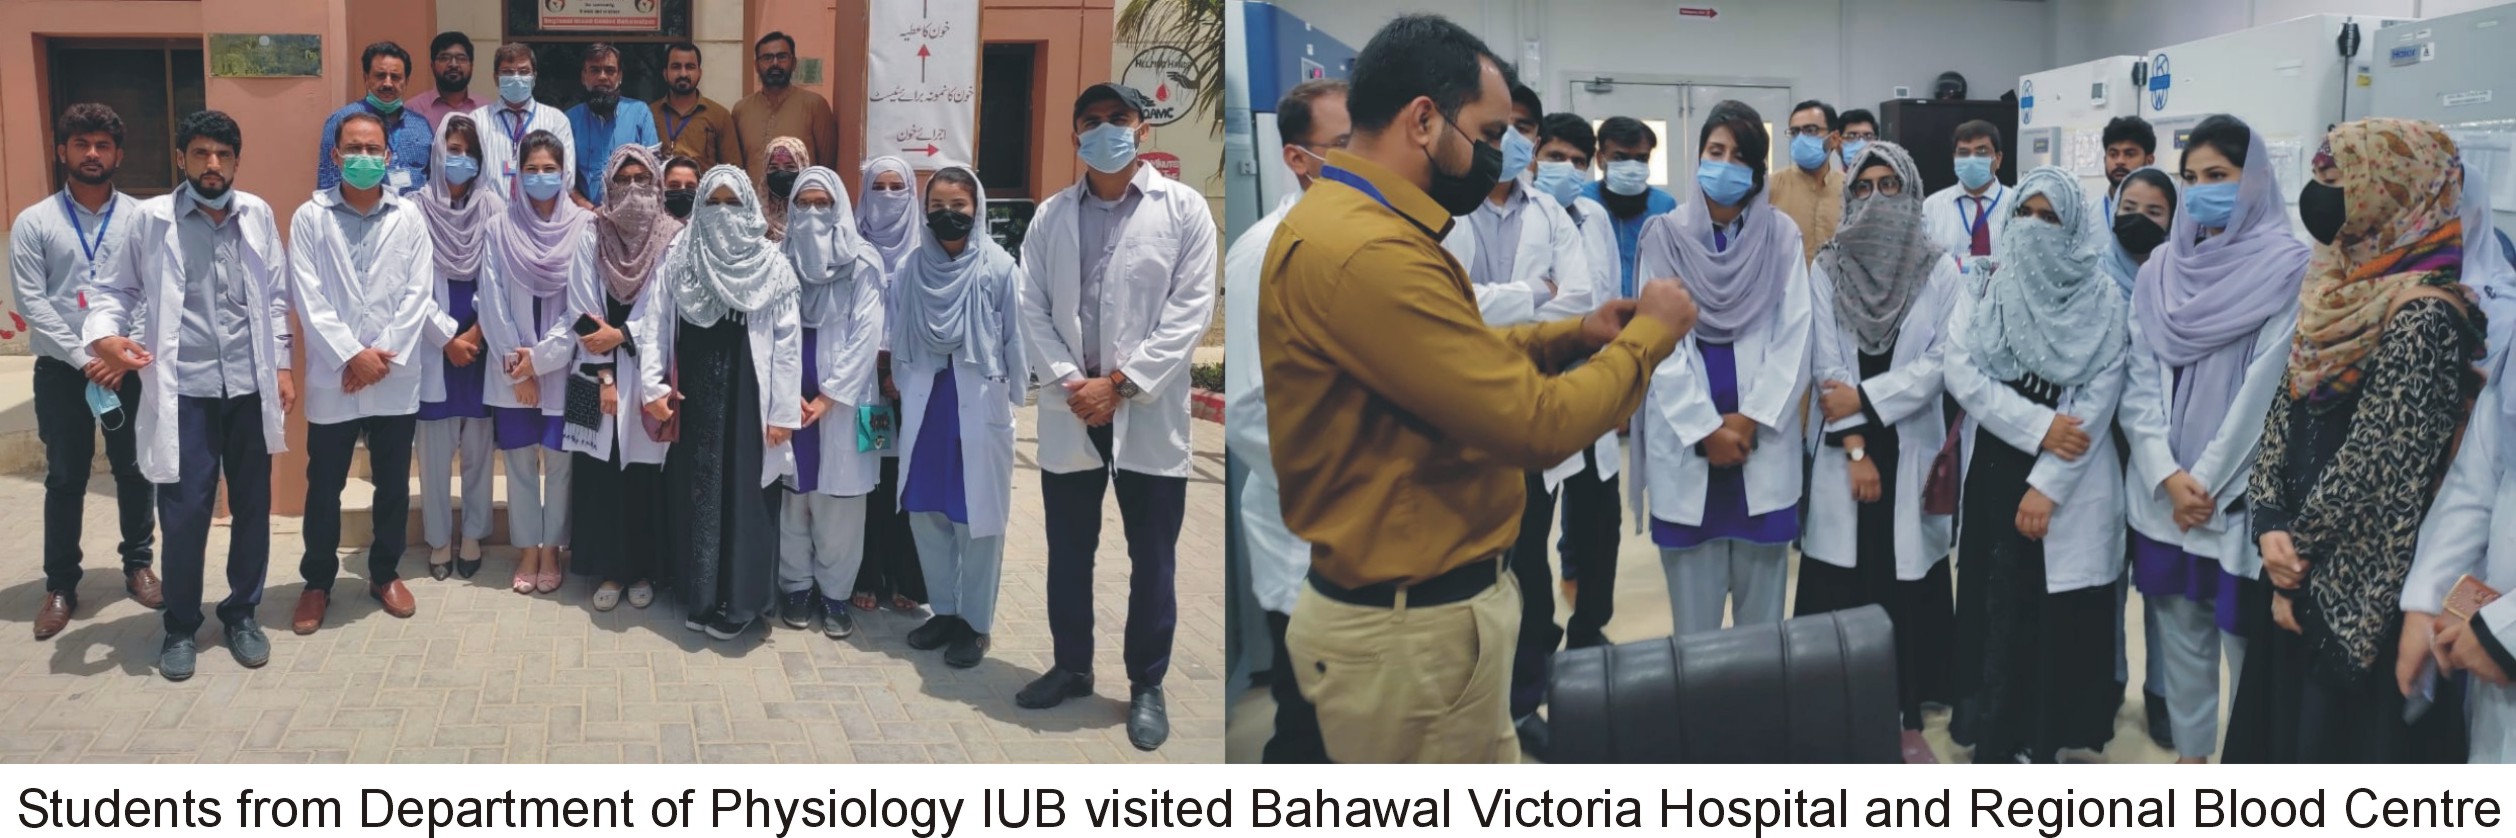 Physiology students visited BVH and Blood Centre-1